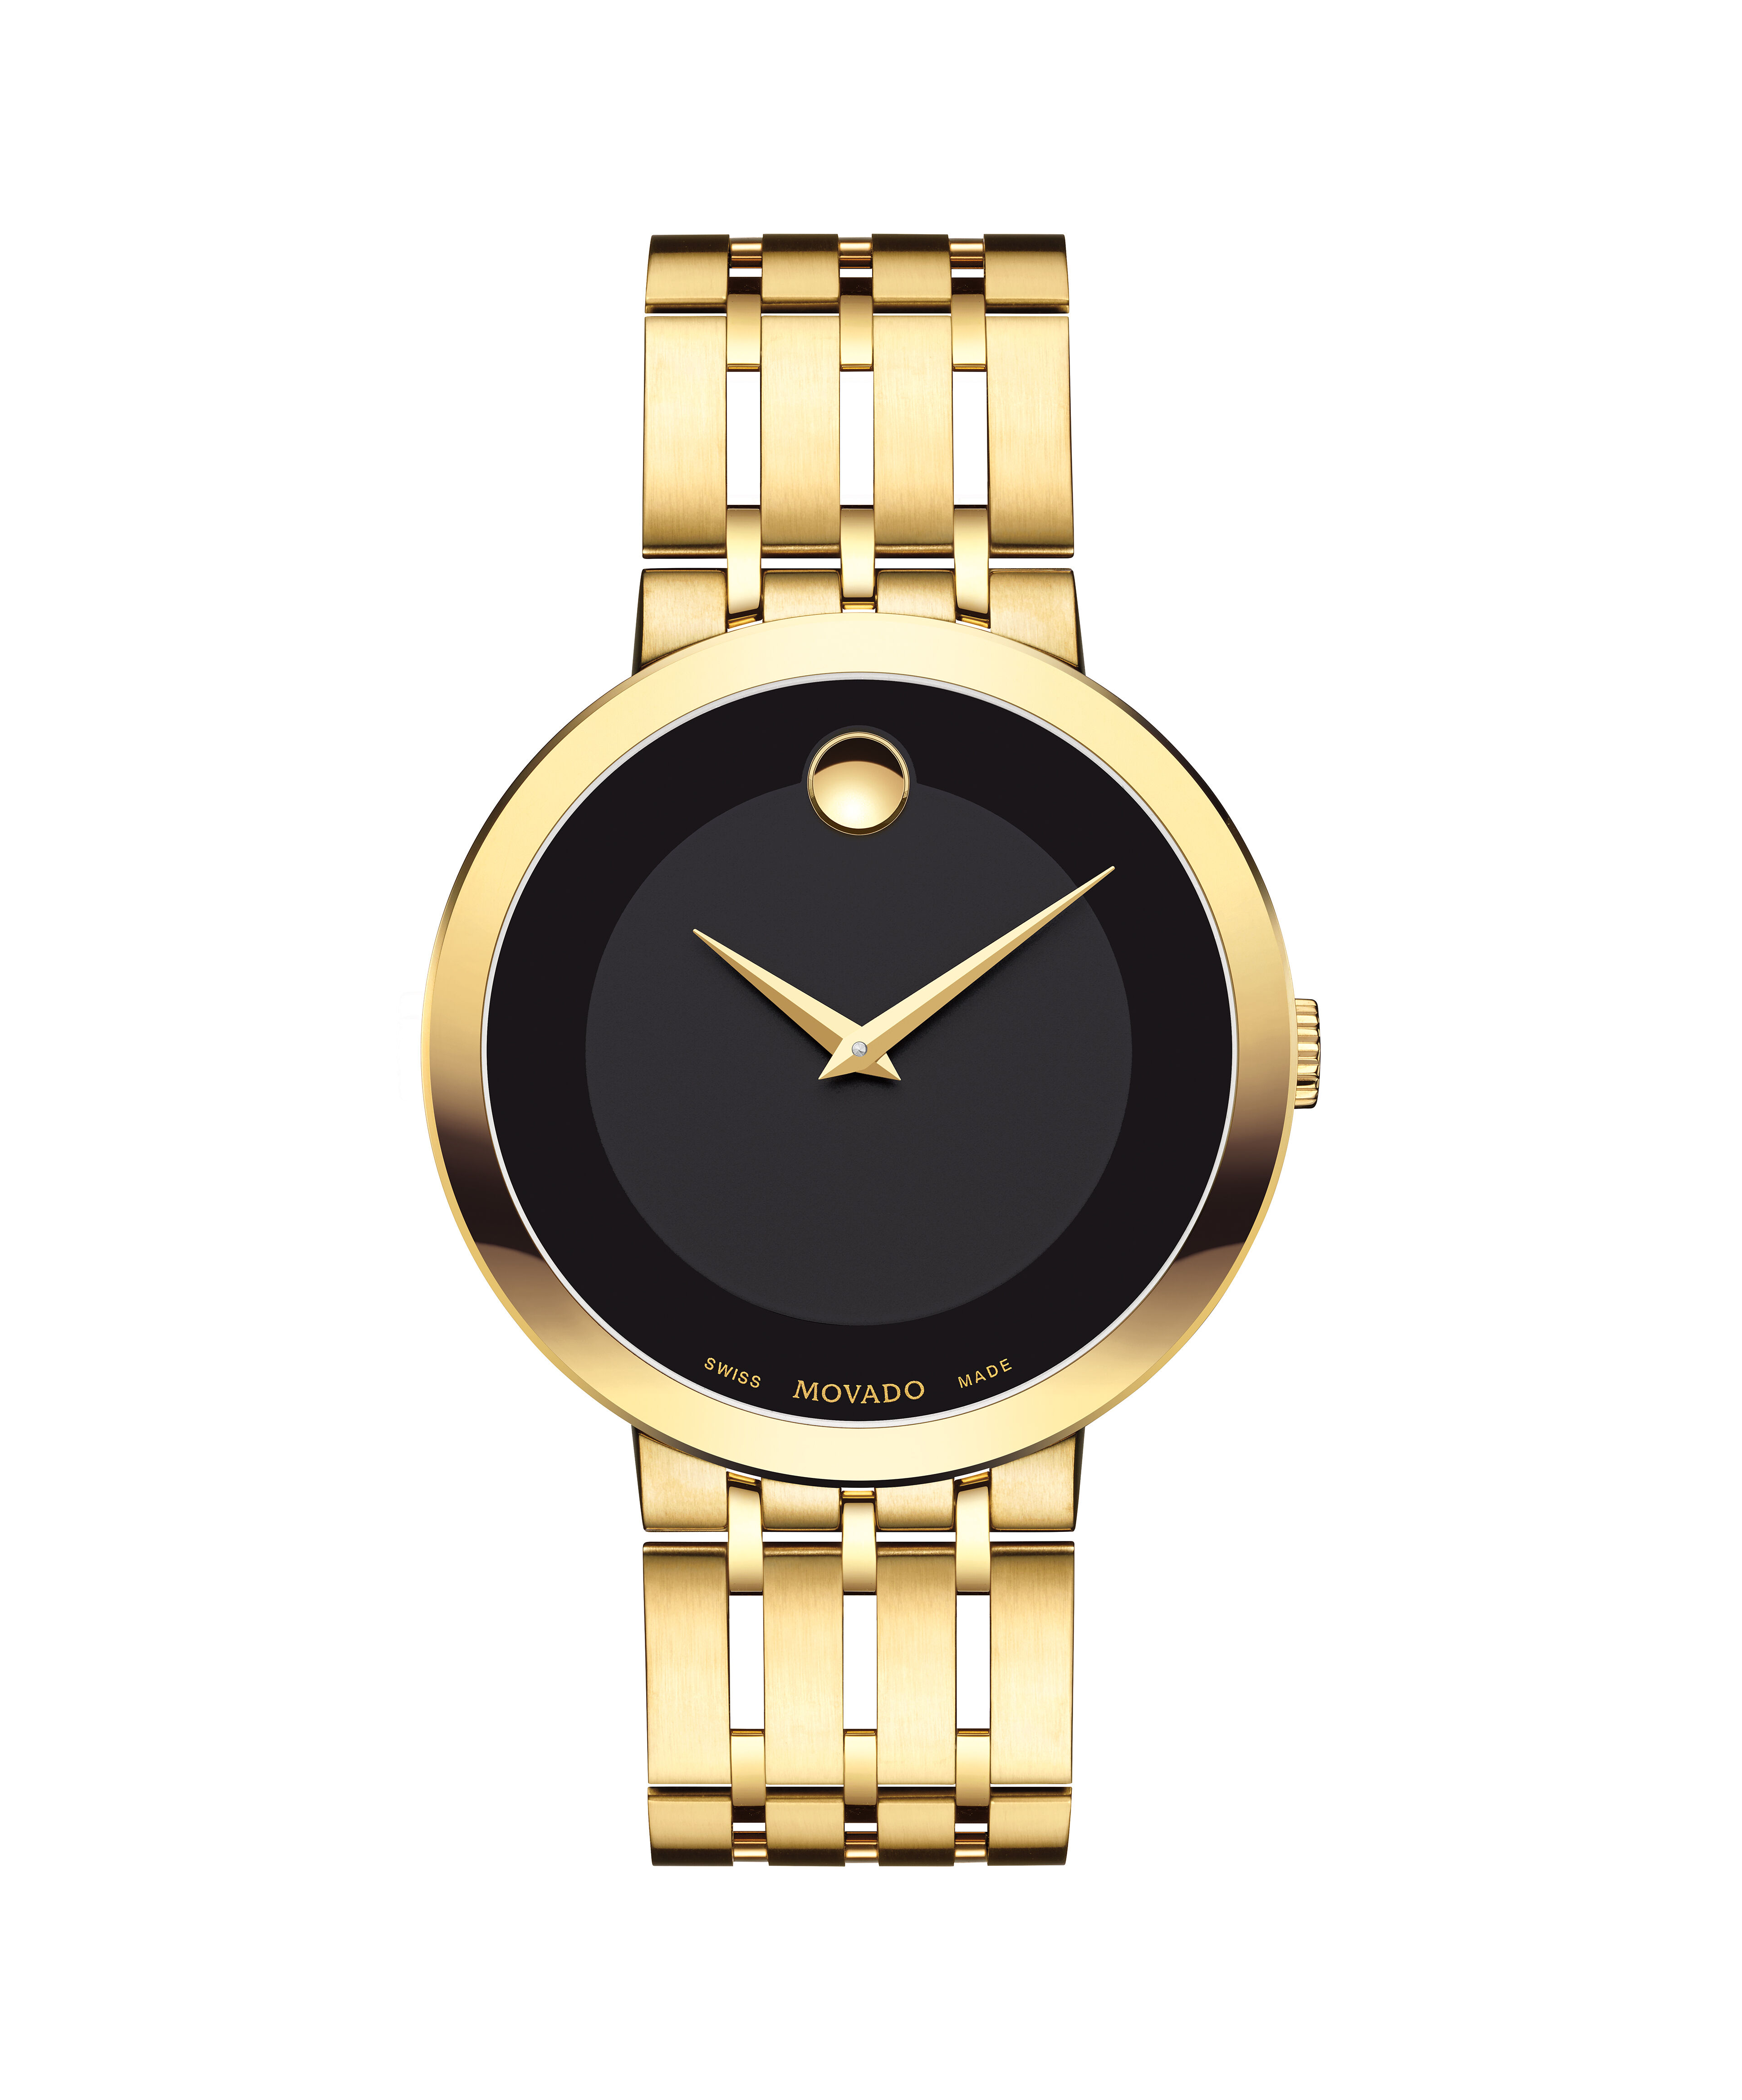 Movado Automatic FB Case Gold Capped Bumper C224 Vintage PatinaMovado Automatic Stainless Steel Ladies Watch